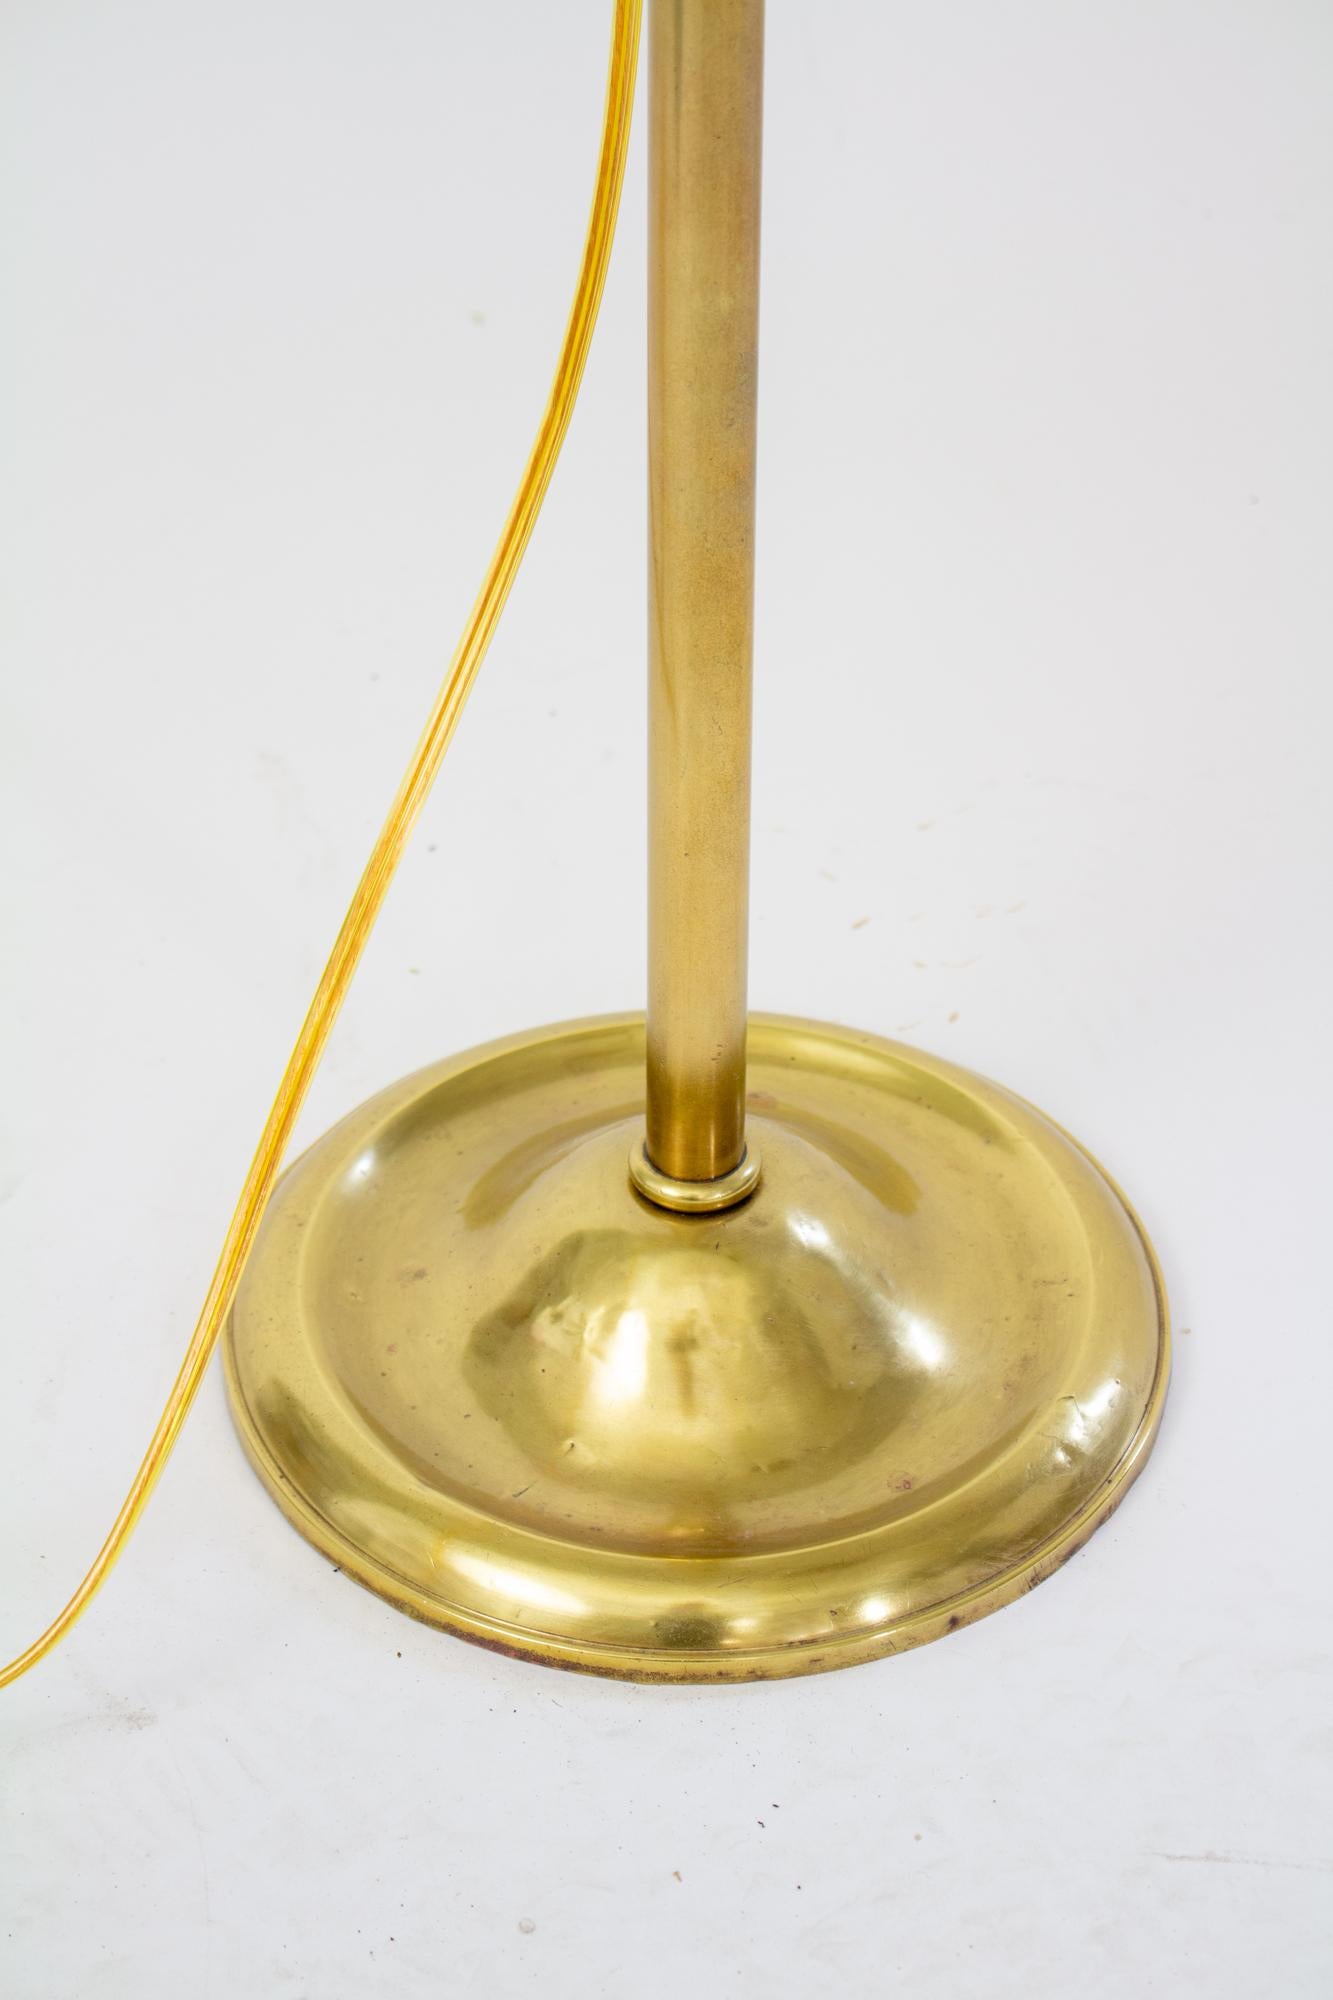 Early 20th Century Edward Miller & Co. adjustable bridge lamp. Brass with brass colored shade. The height and angle of the lamp are adjustable. Base is marked EM & Co. Early 20th Century, US. Rewired with replacement socket, shade is replacement